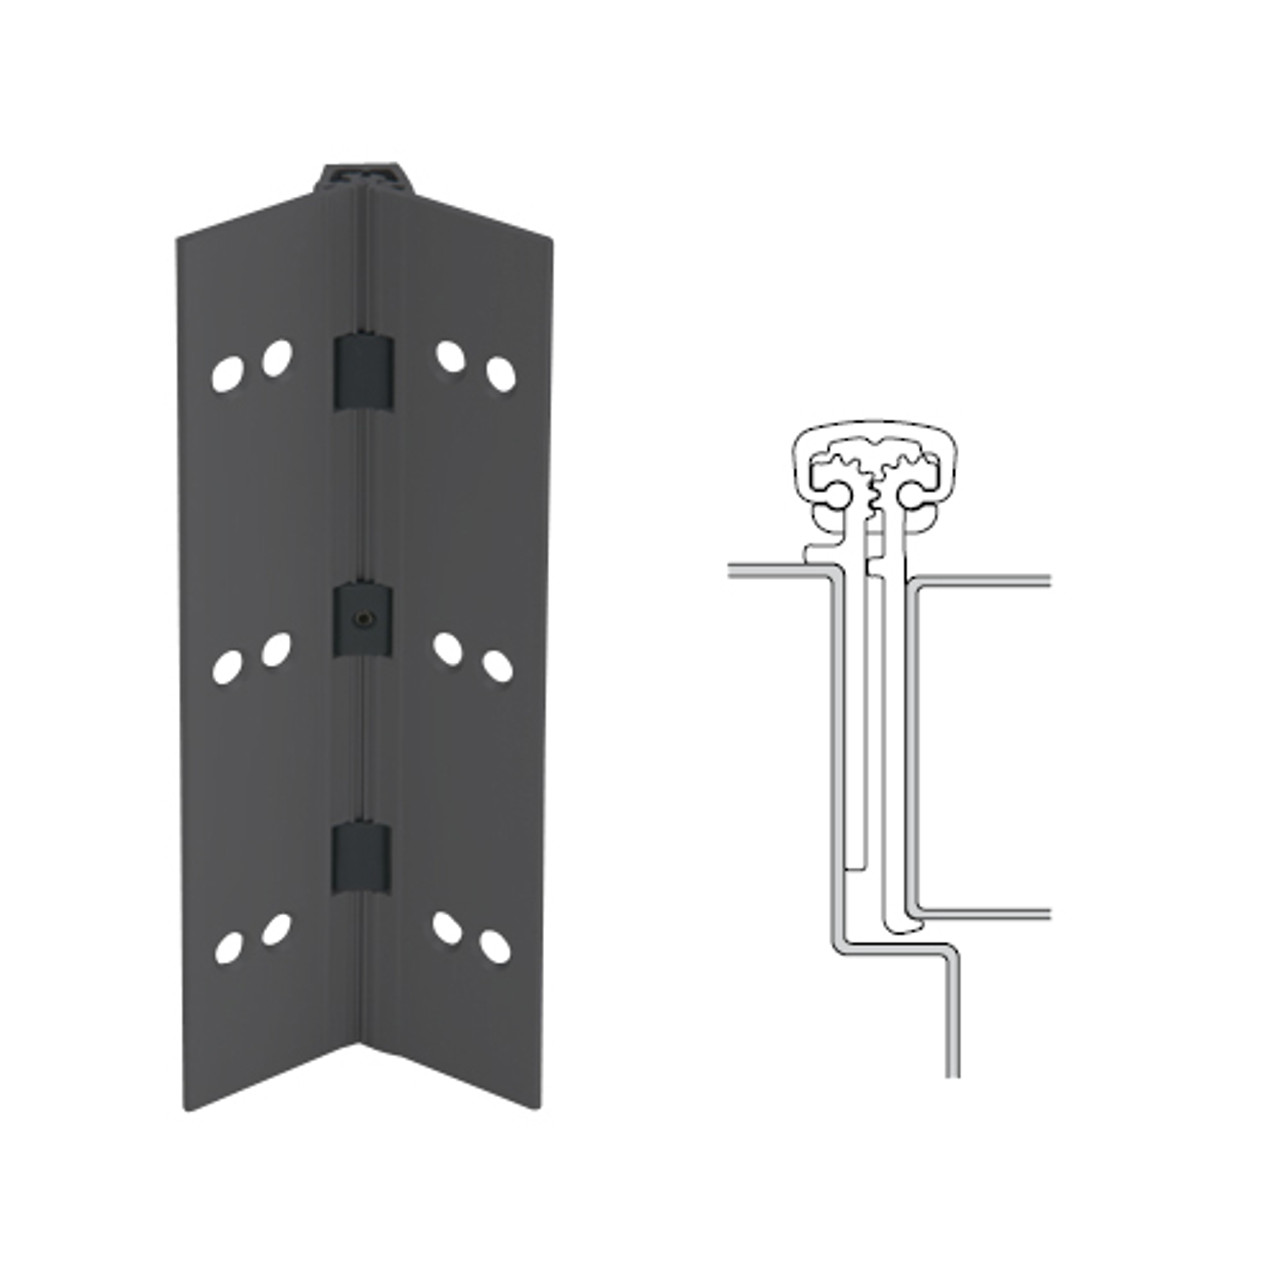 114XY-315AN-85 IVES Full Mortise Continuous Geared Hinges in Anodized Black